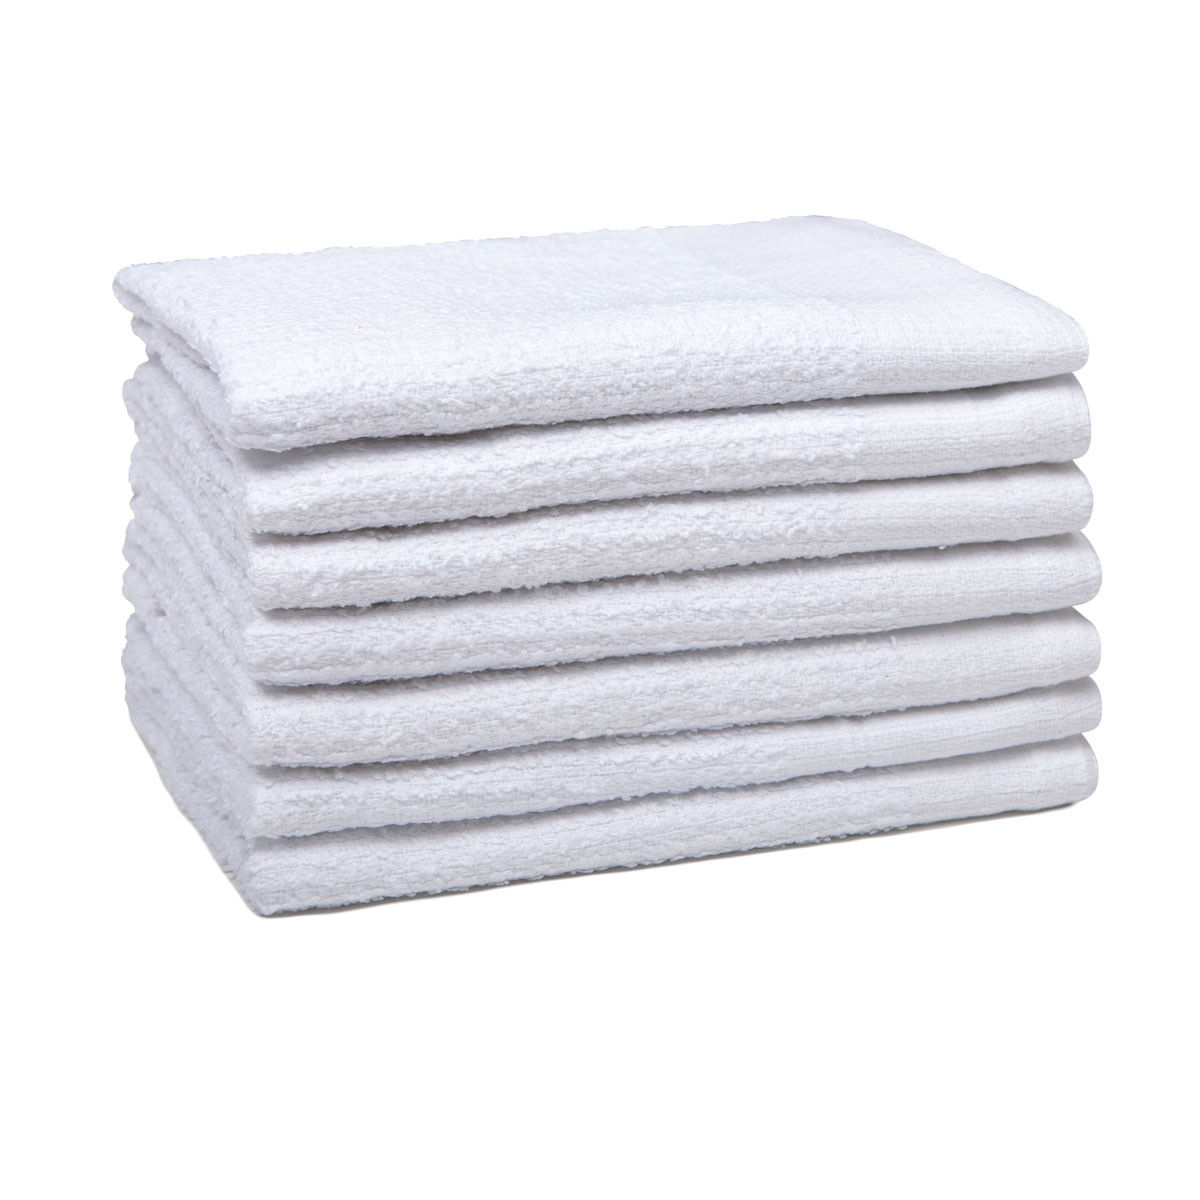 What type of cloth is best for maximum absorption with Wholesale Bar Mop Towels?